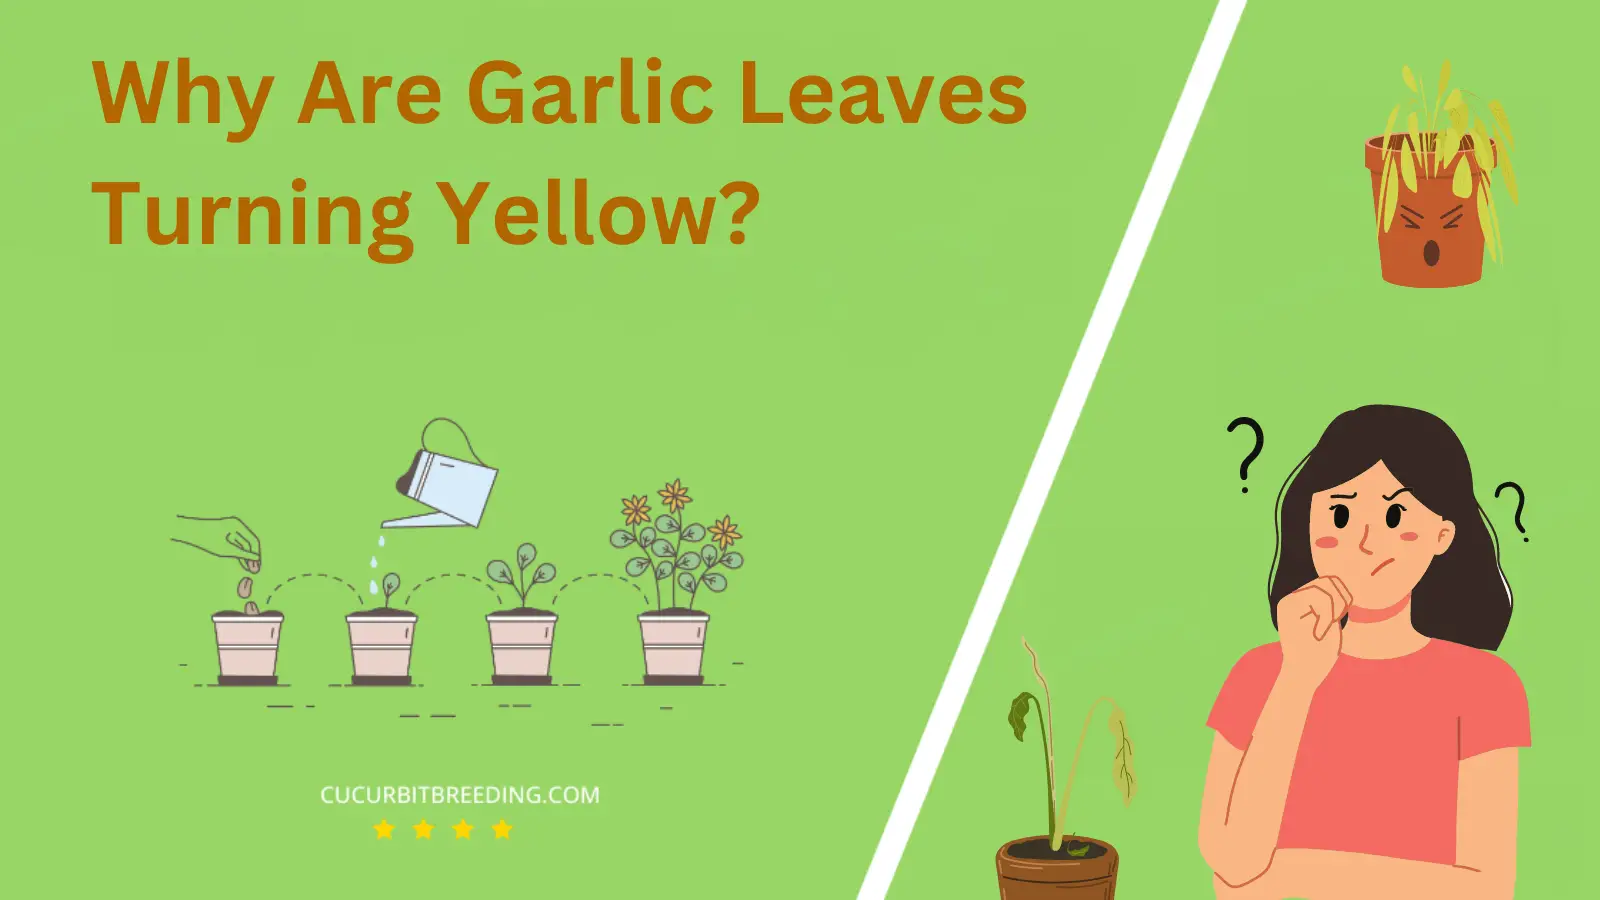 Why Are Garlic Leaves Turning Yellow